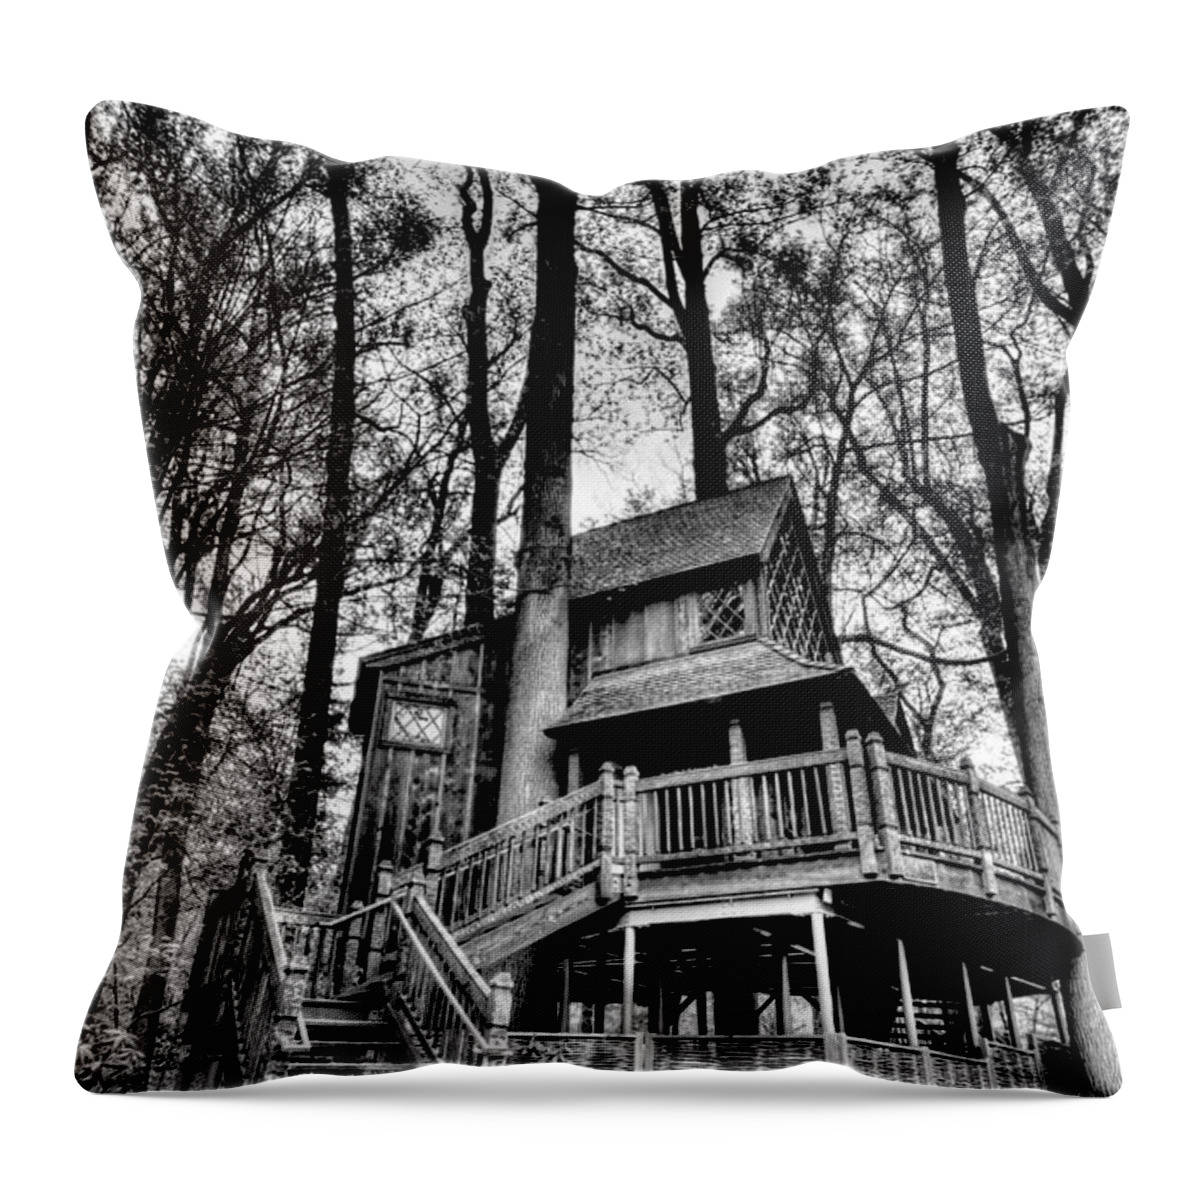 D3-epa-0465-b Throw Pillow featuring the photograph My little outhouse by Paul W Faust - Impressions of Light